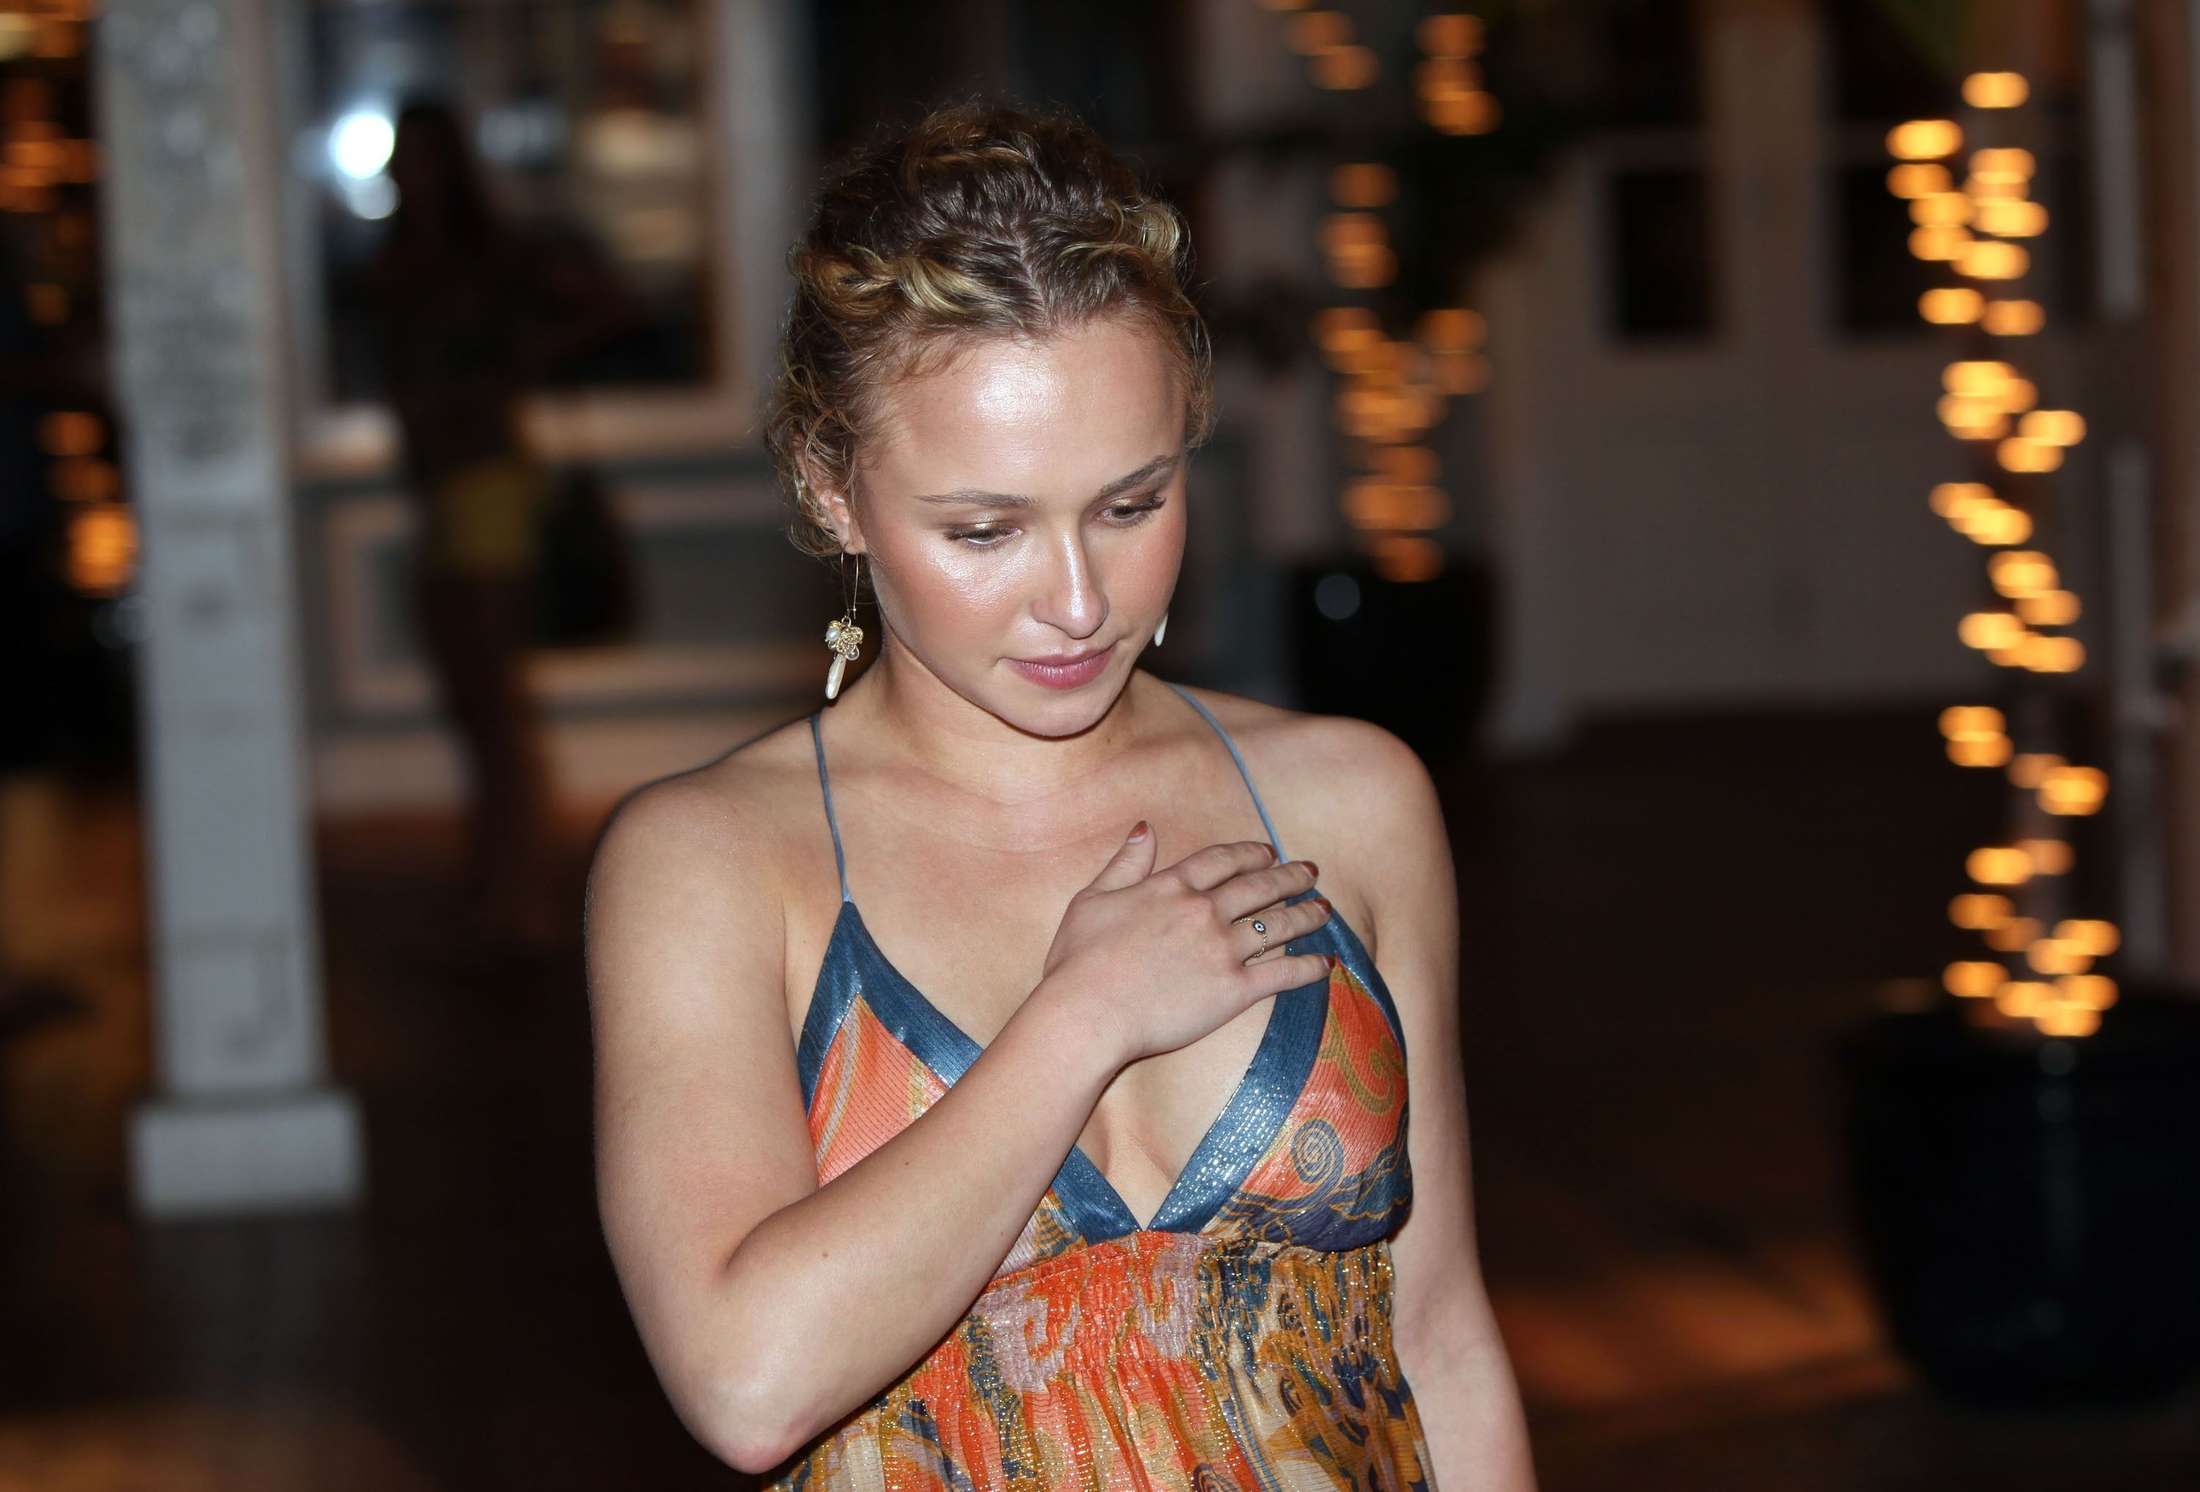 Hayden Panettiere - Cleavage Candids at Kimo’s Restaurant. 